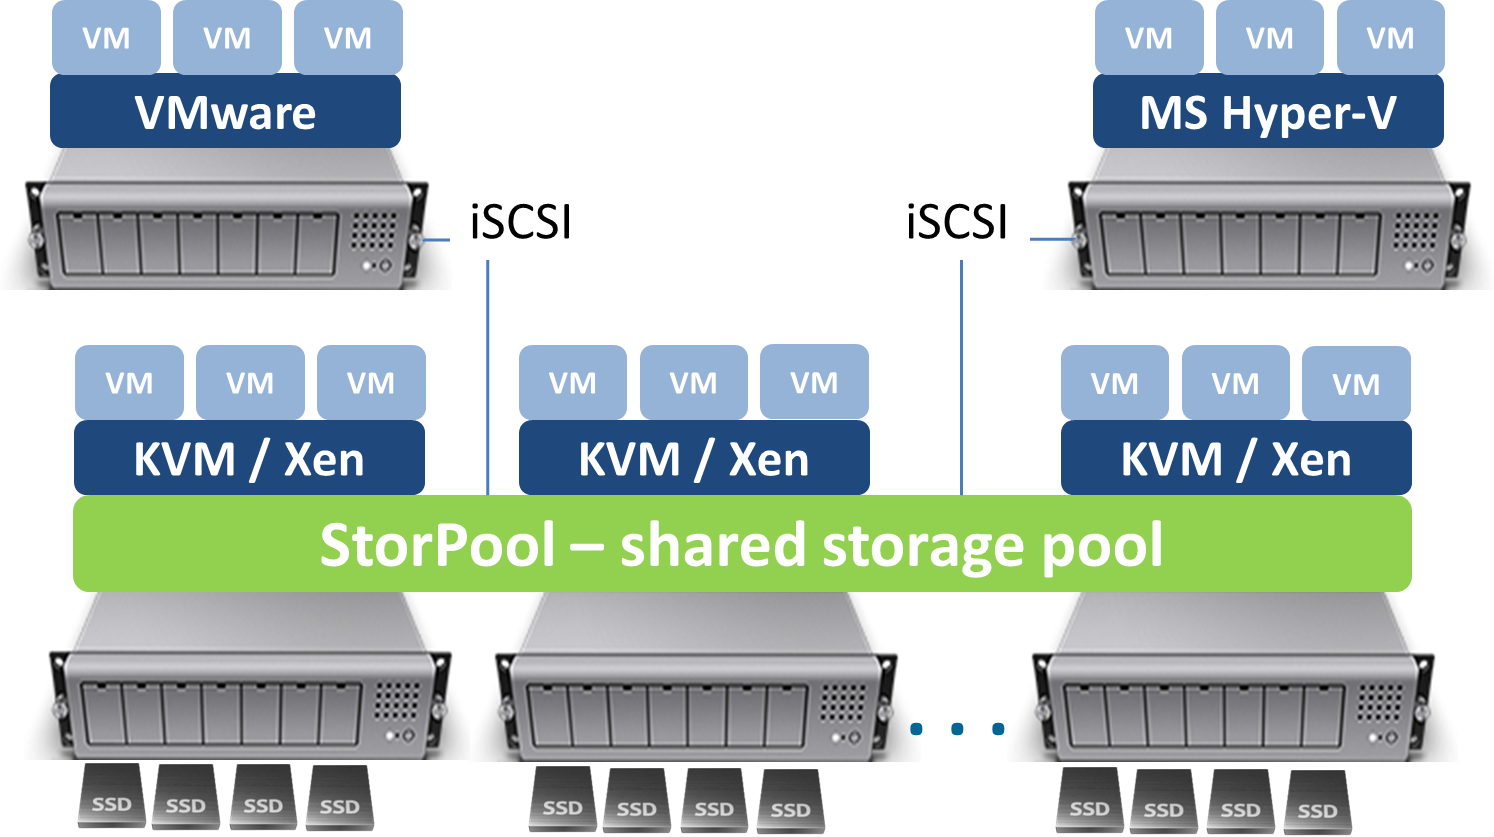 StorPool software-defined architecture